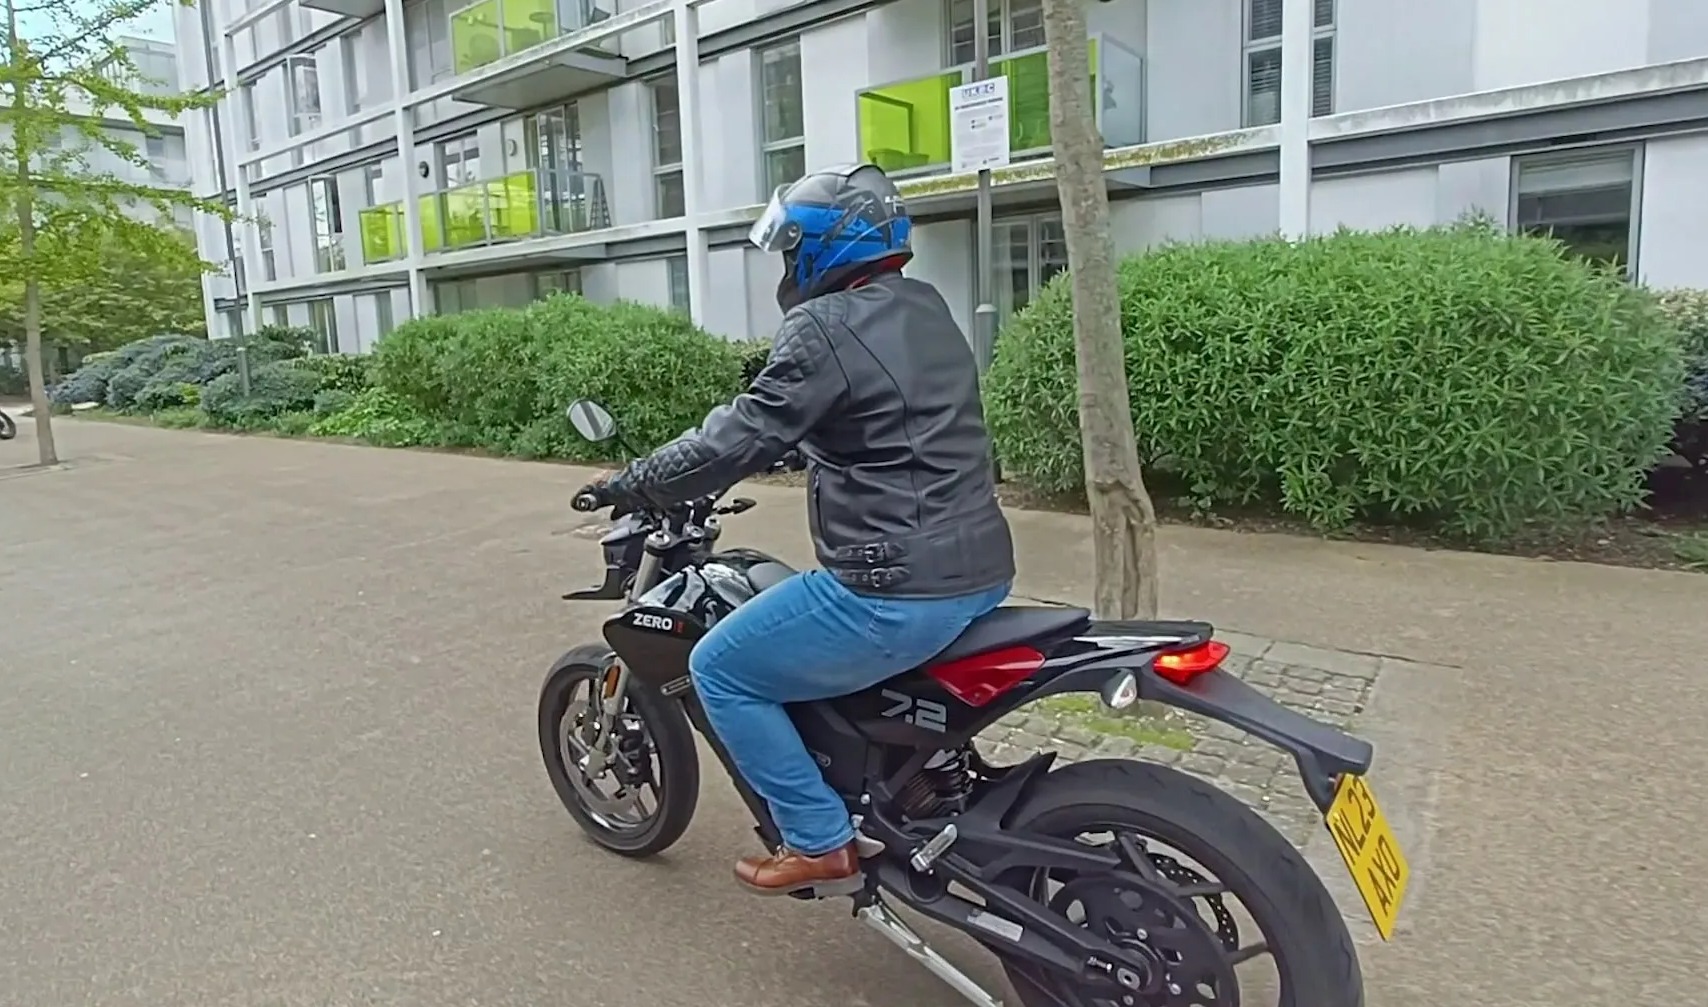 No licence is needed as the bike can be ridden on a CBT certificate